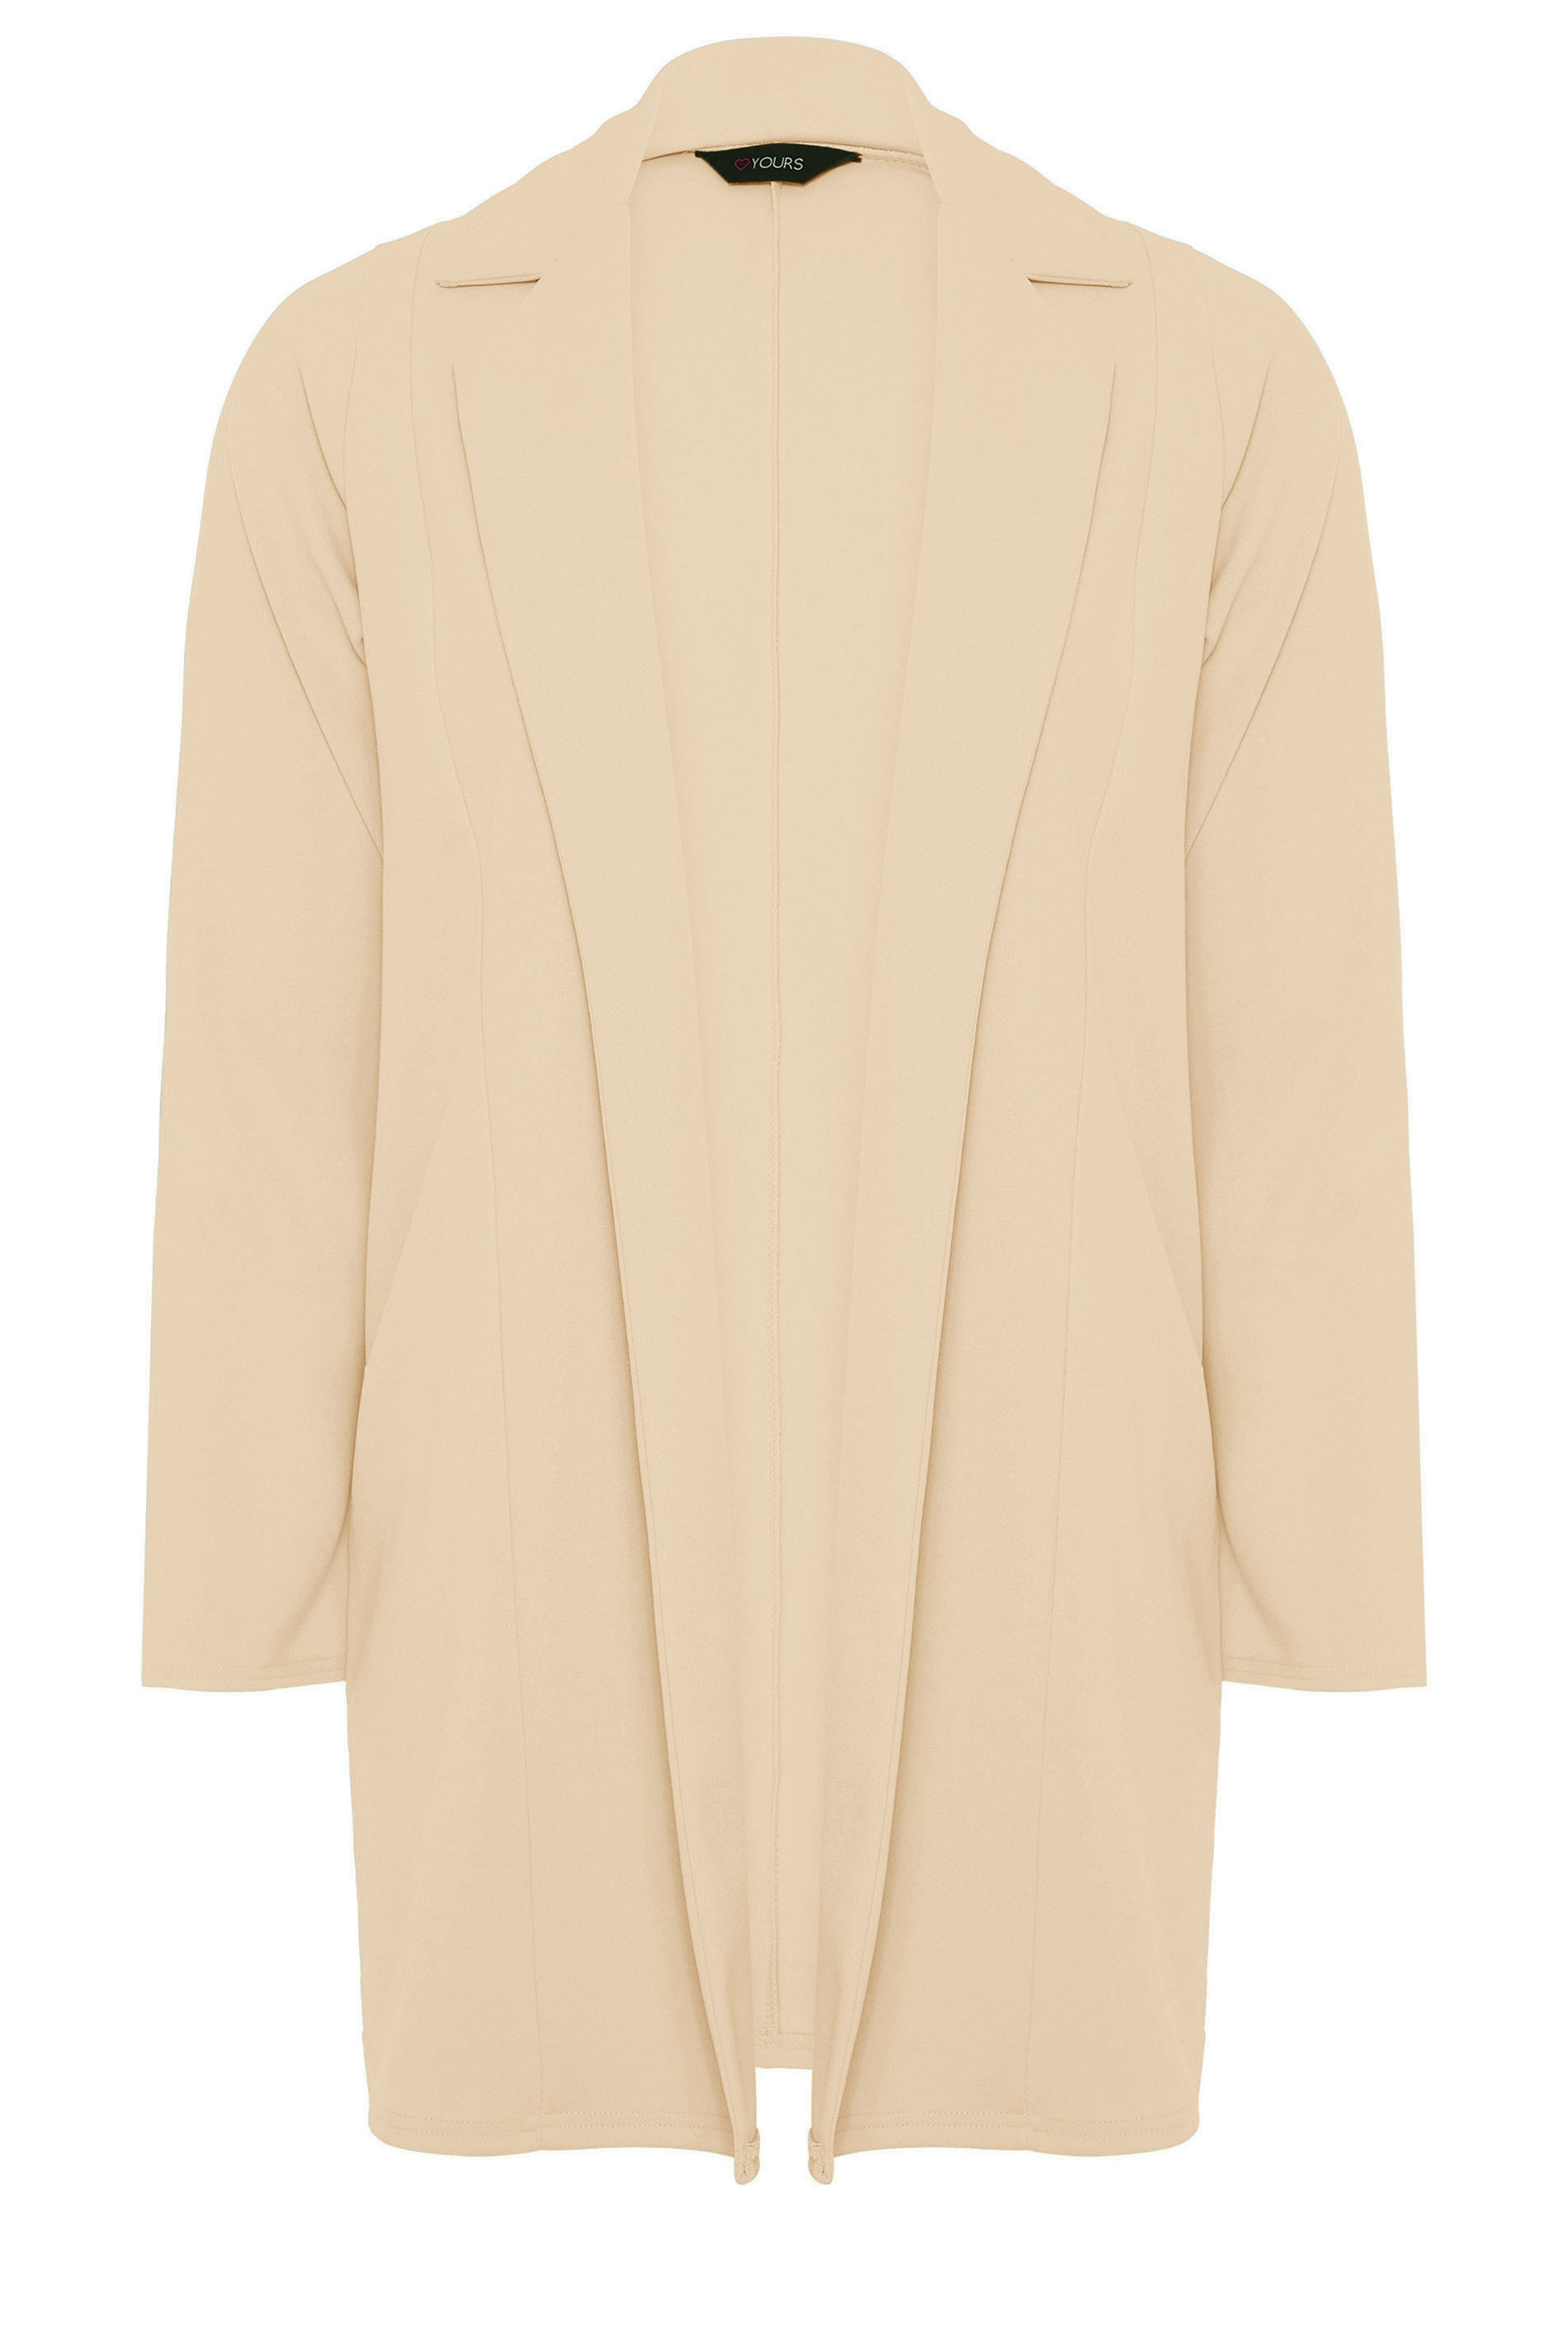 YOURS Curve Plus Size Beige Brown Longline Blazer | Yours Clothing  2